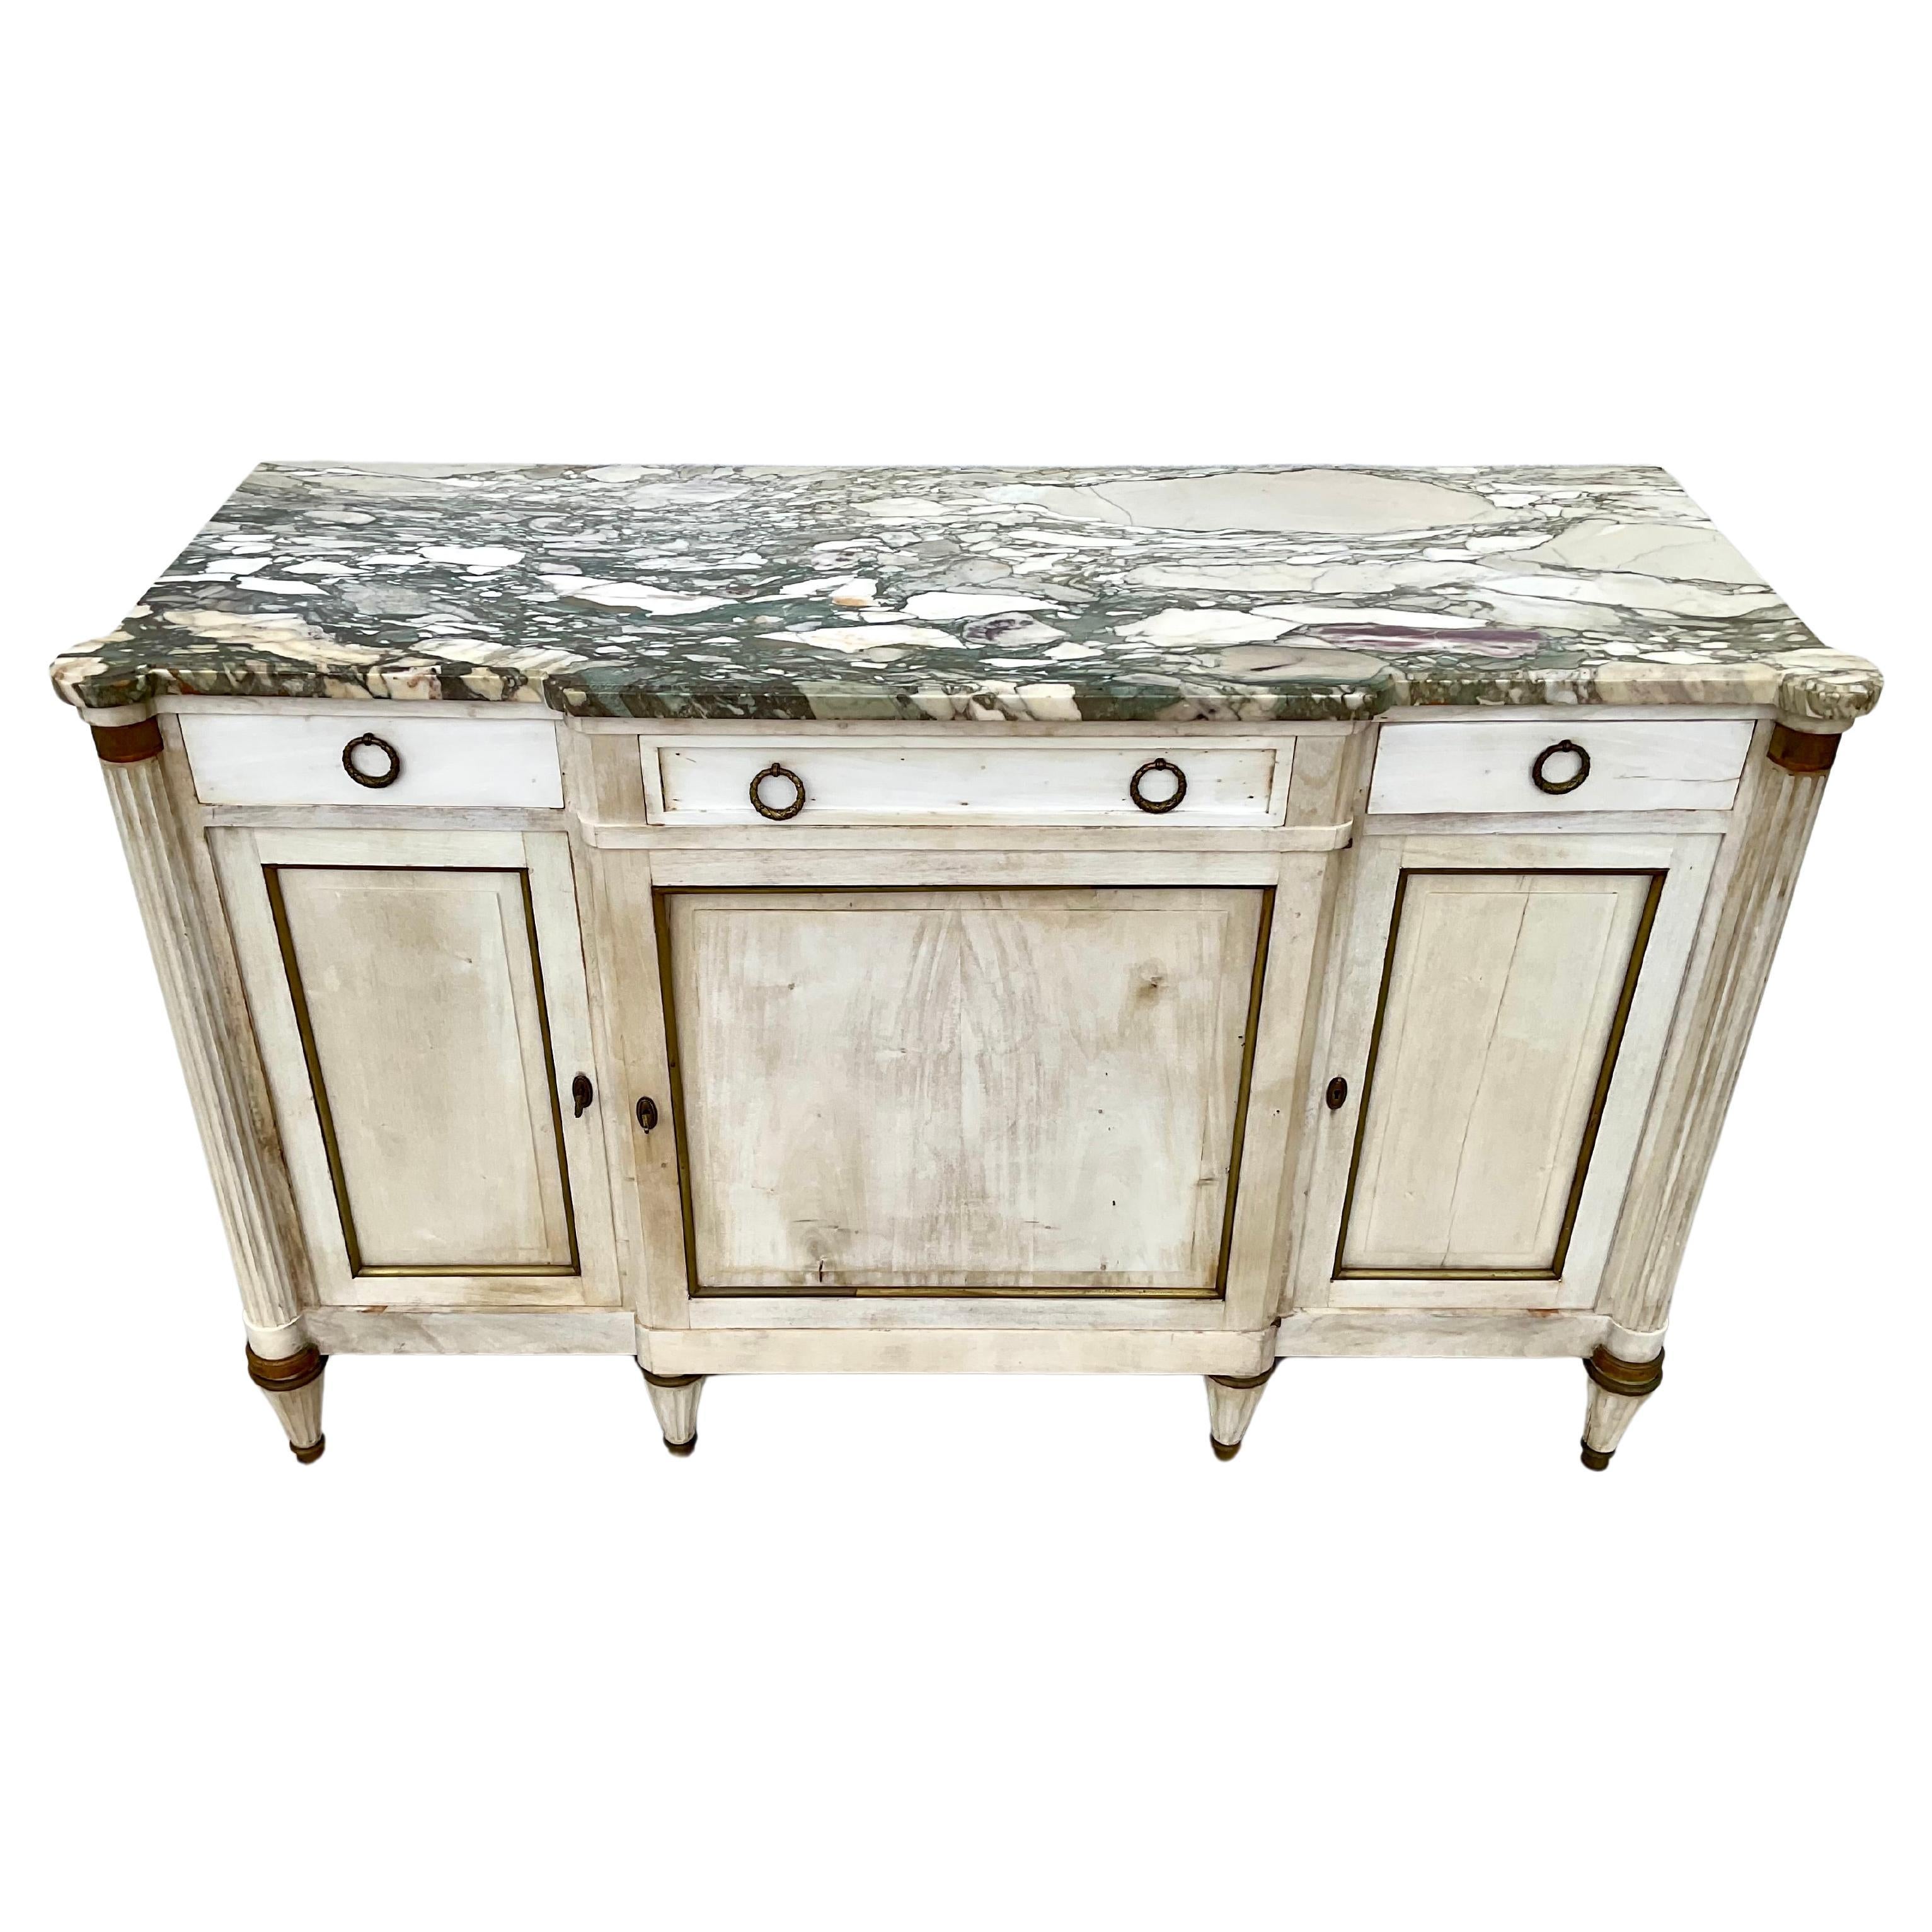 Wood Antique French Louis XVI Style Bleached Cherry Enfilade Buffet